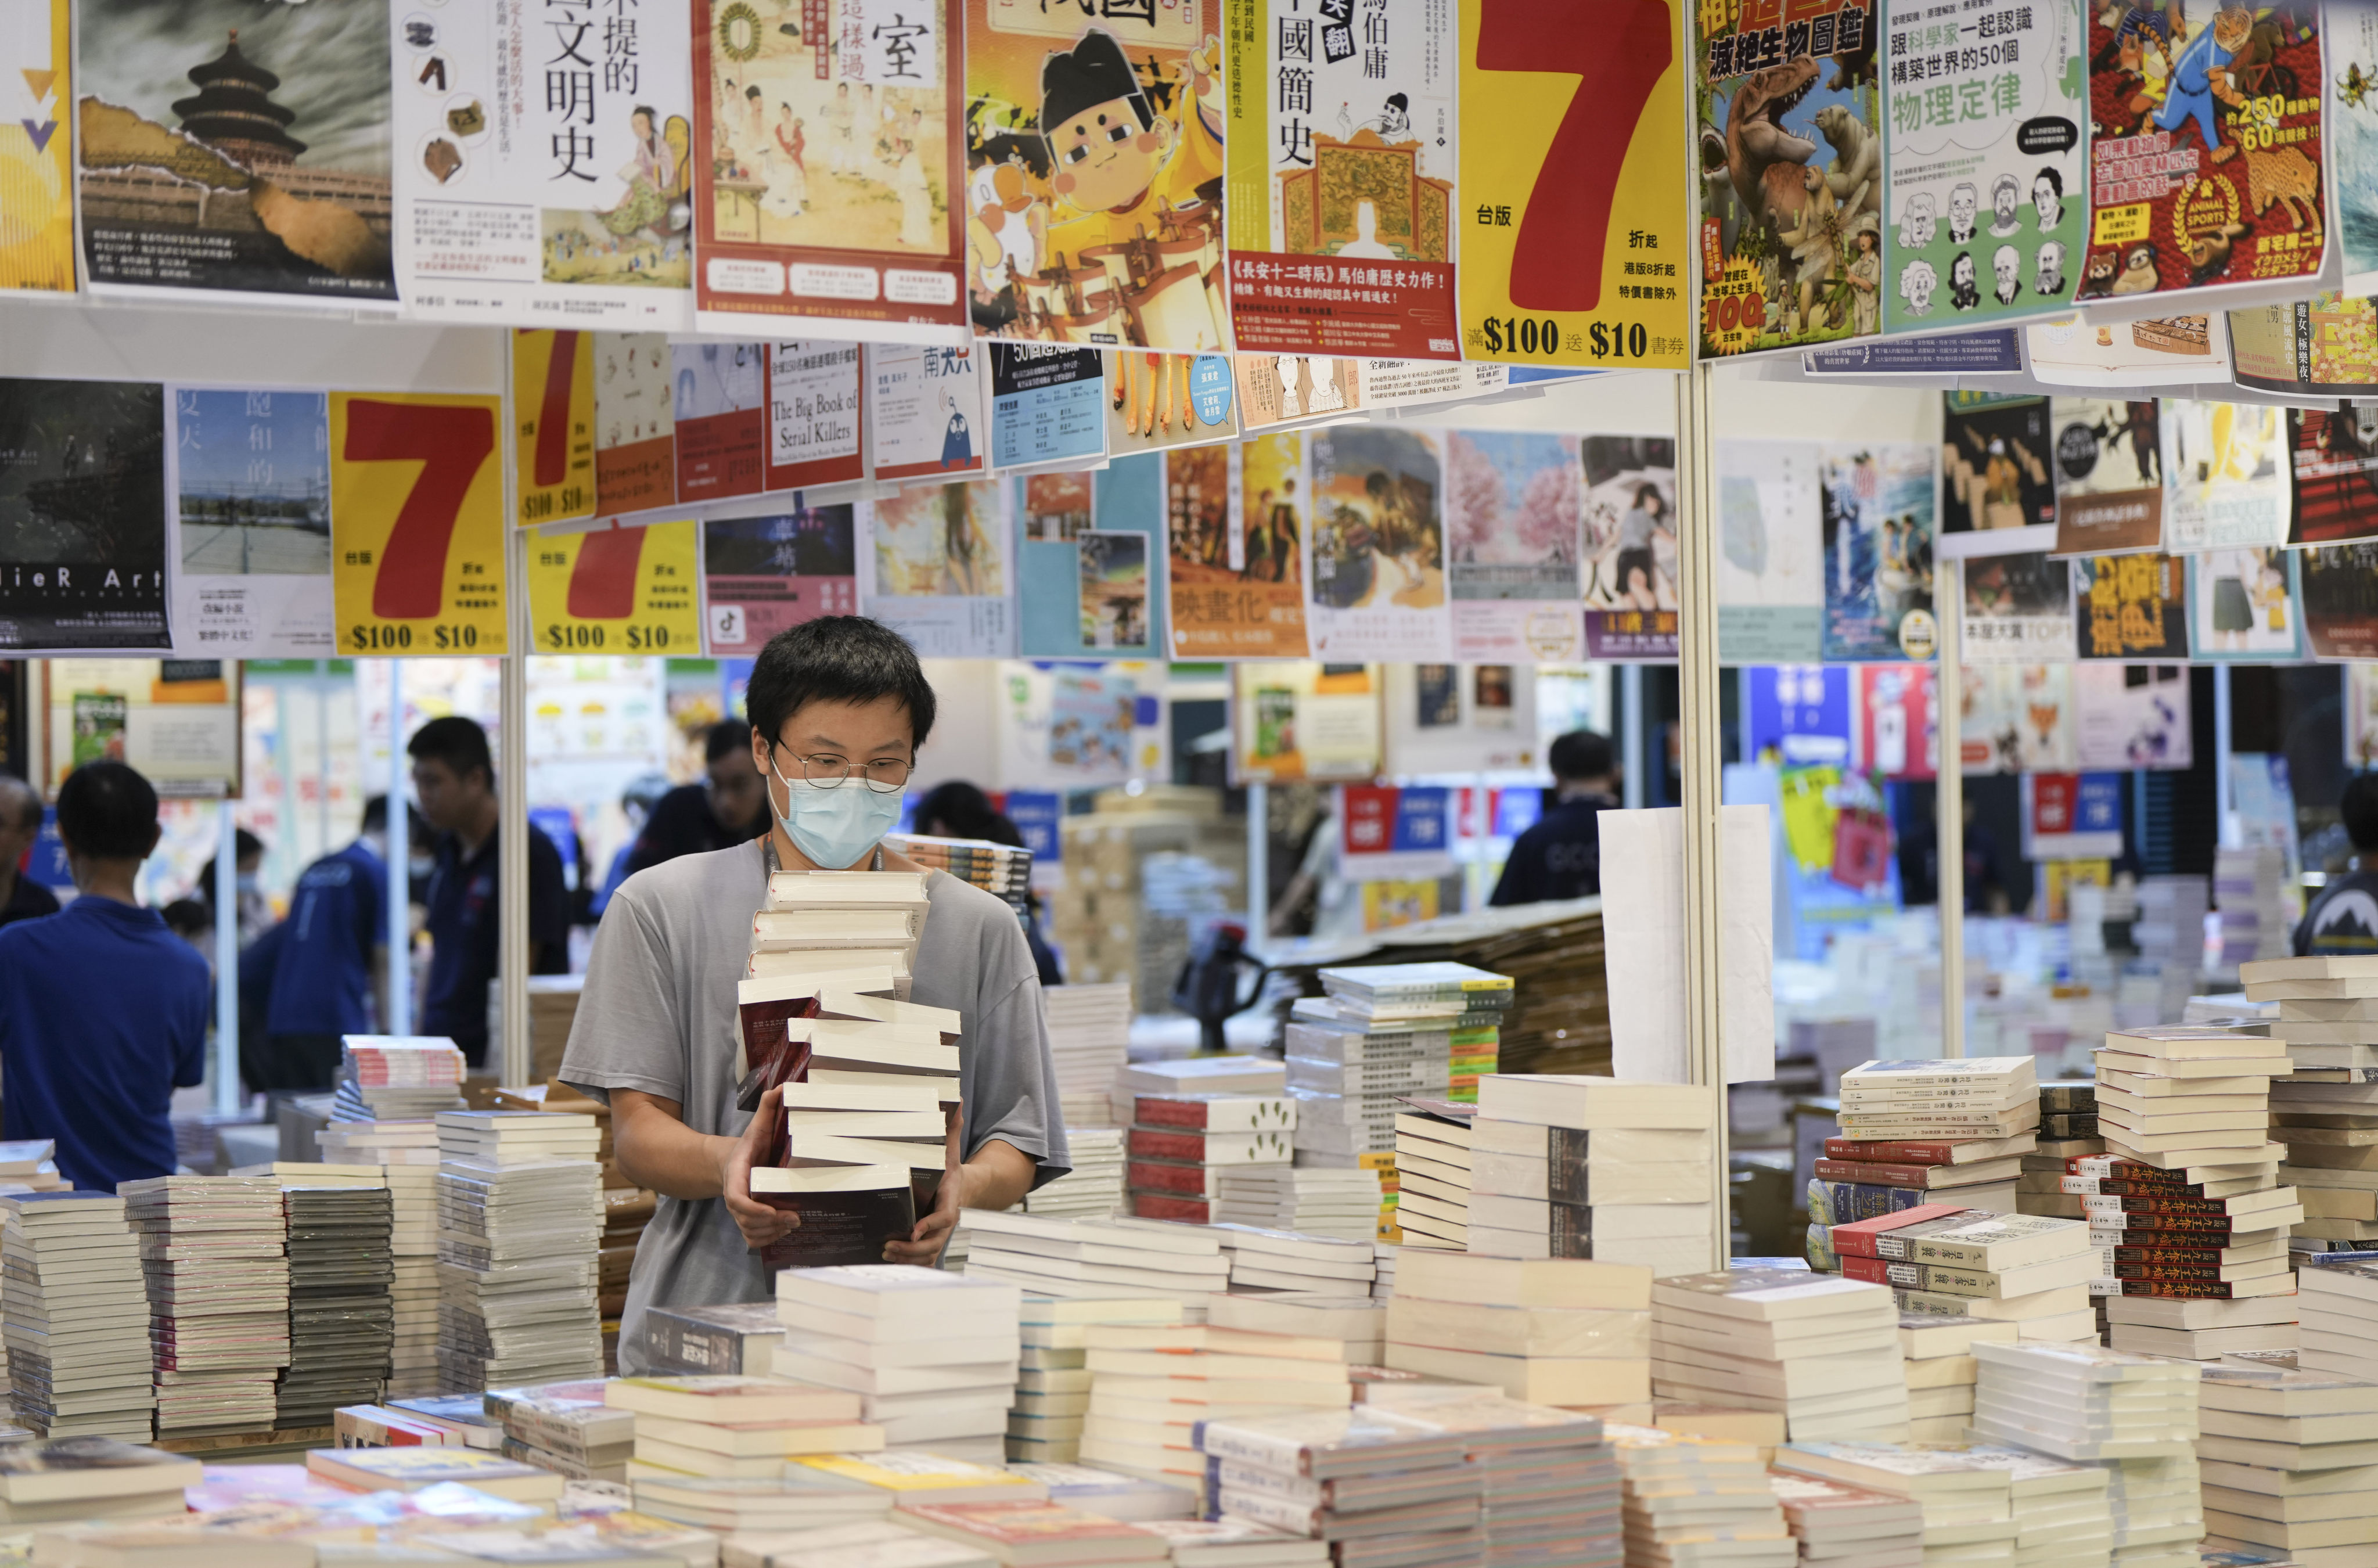 Exhibitors at the Hong Kong Book Fair work flat on Tuesday to prepare for Wednesday’s opening. Photo: Sam Tsang